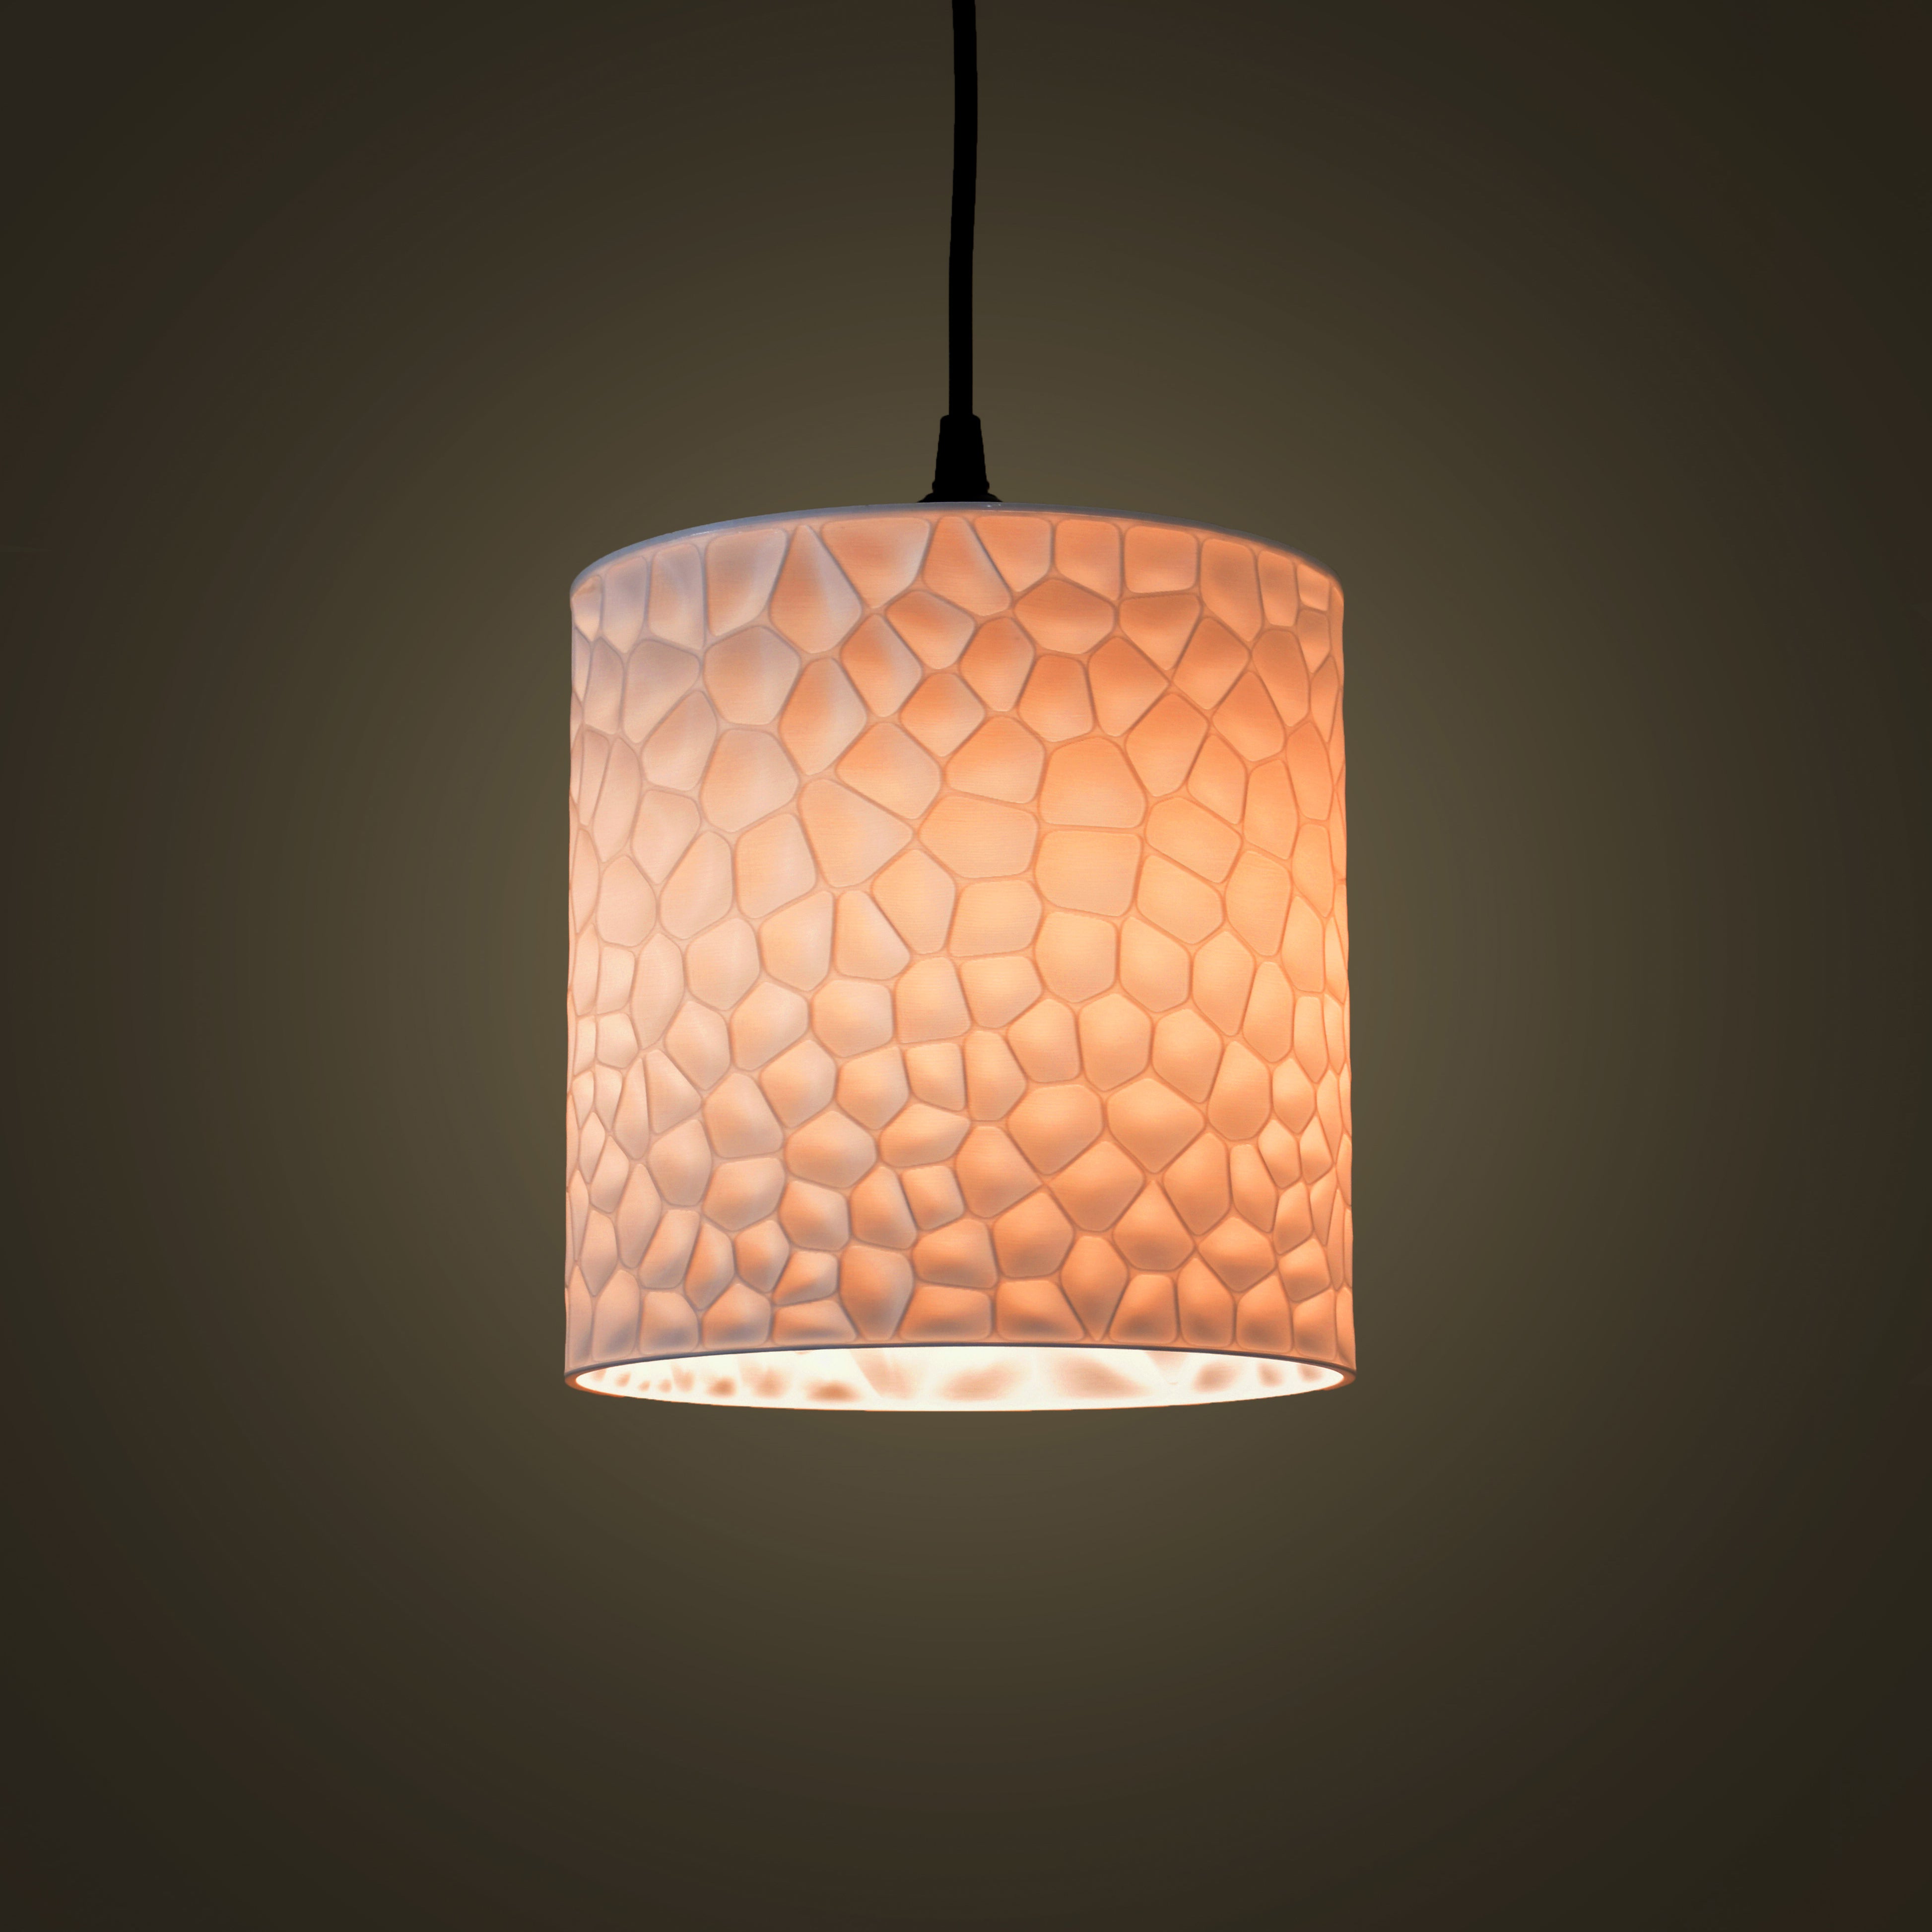 3d Printed lampshade compatible with e26  socket. Customizable pattern. Lighting for any room. Unique Hanging pendant lamp, one of a kind. 